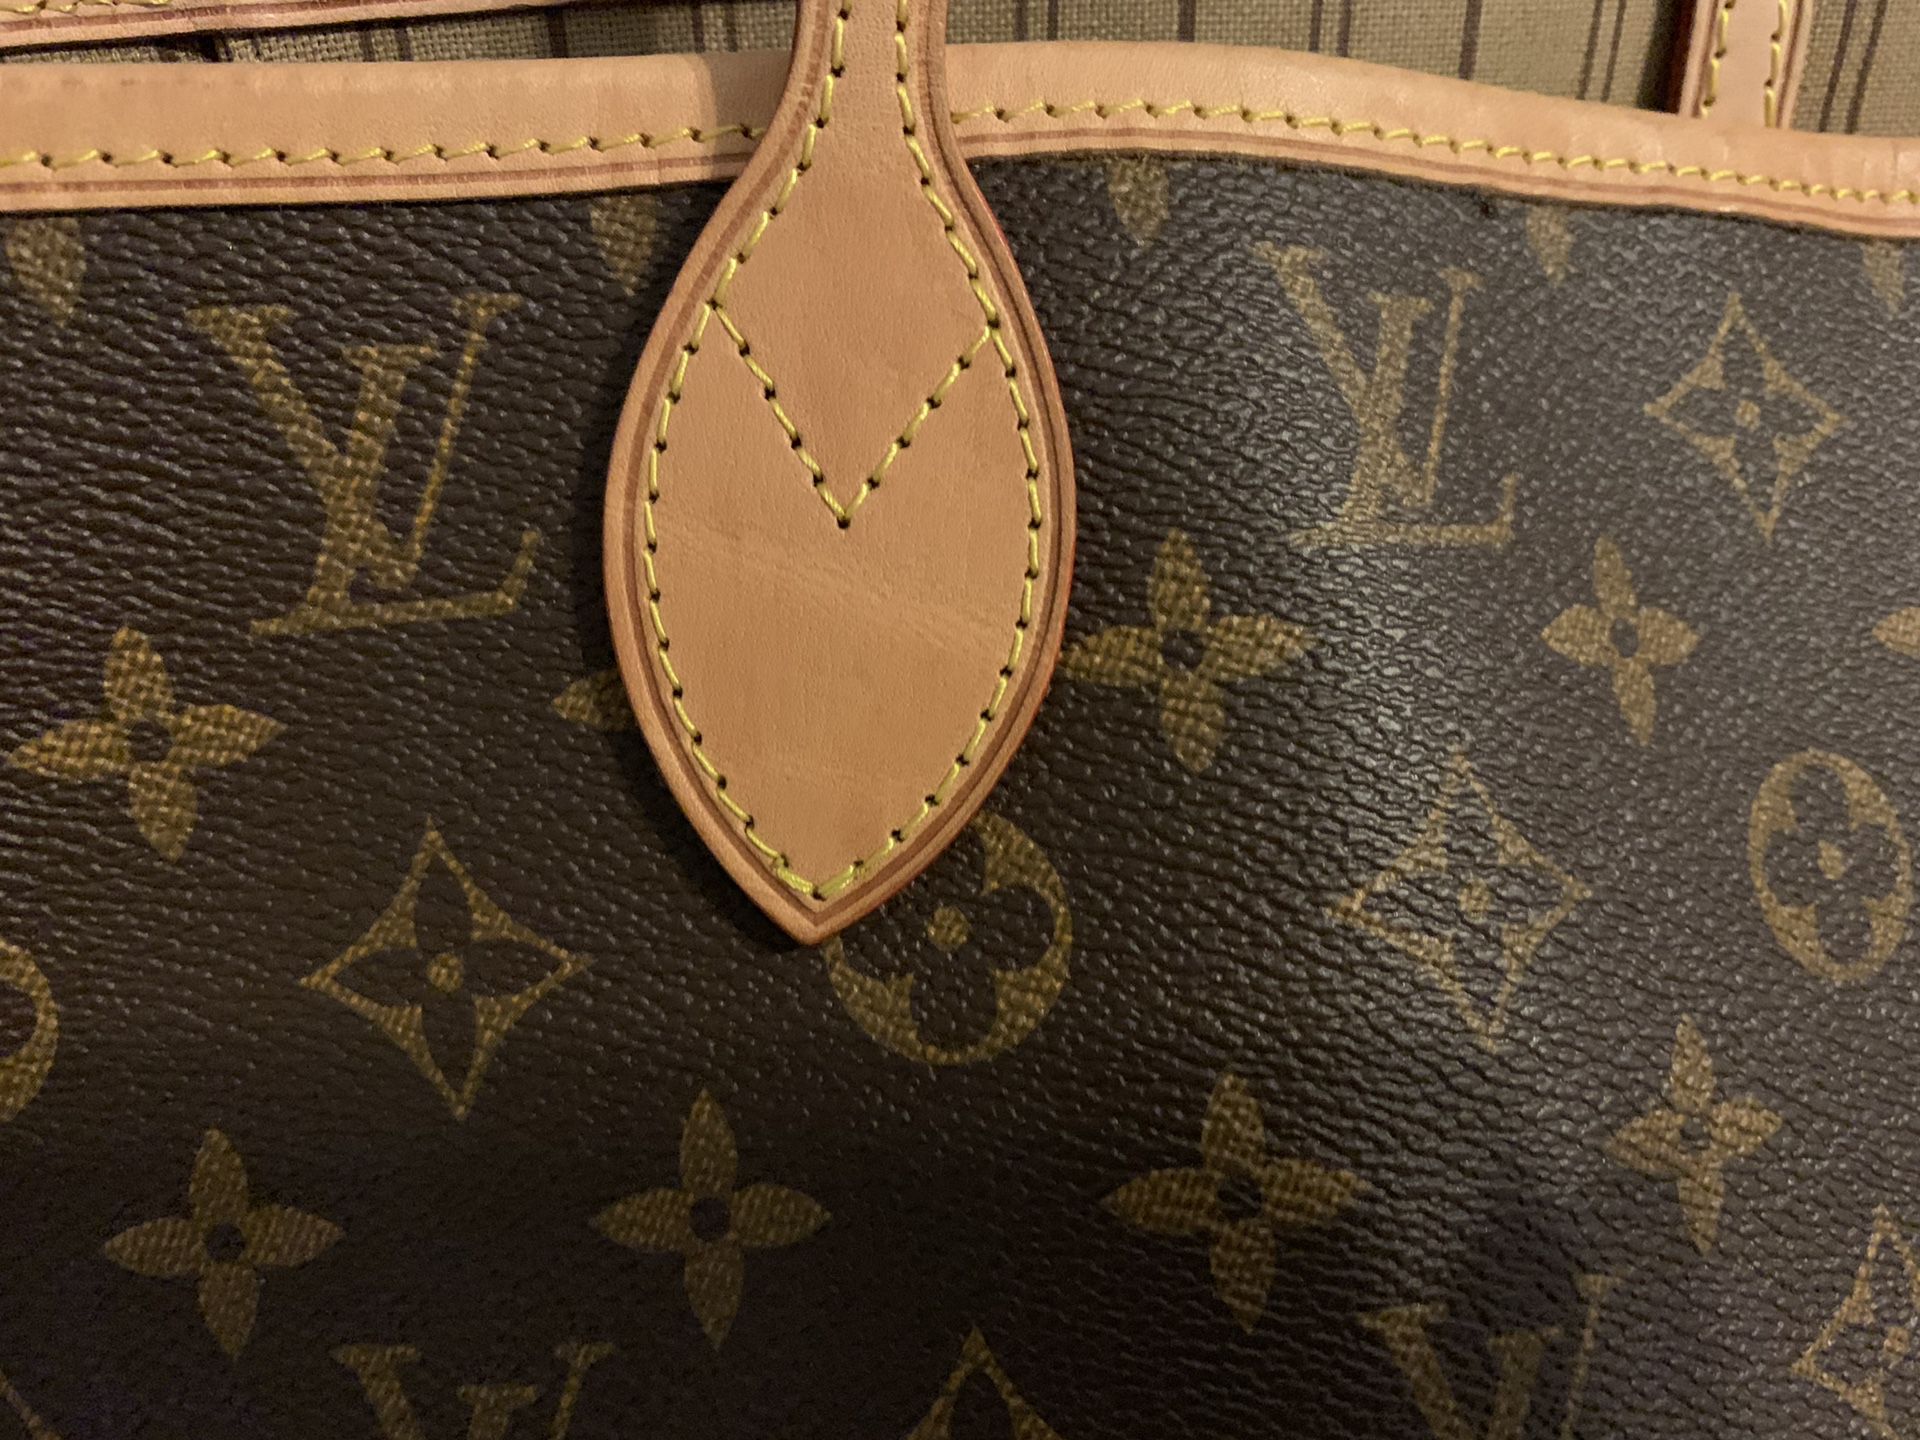 Louis Vuitton Neverfull MM for Sale in McKinney, TX - OfferUp